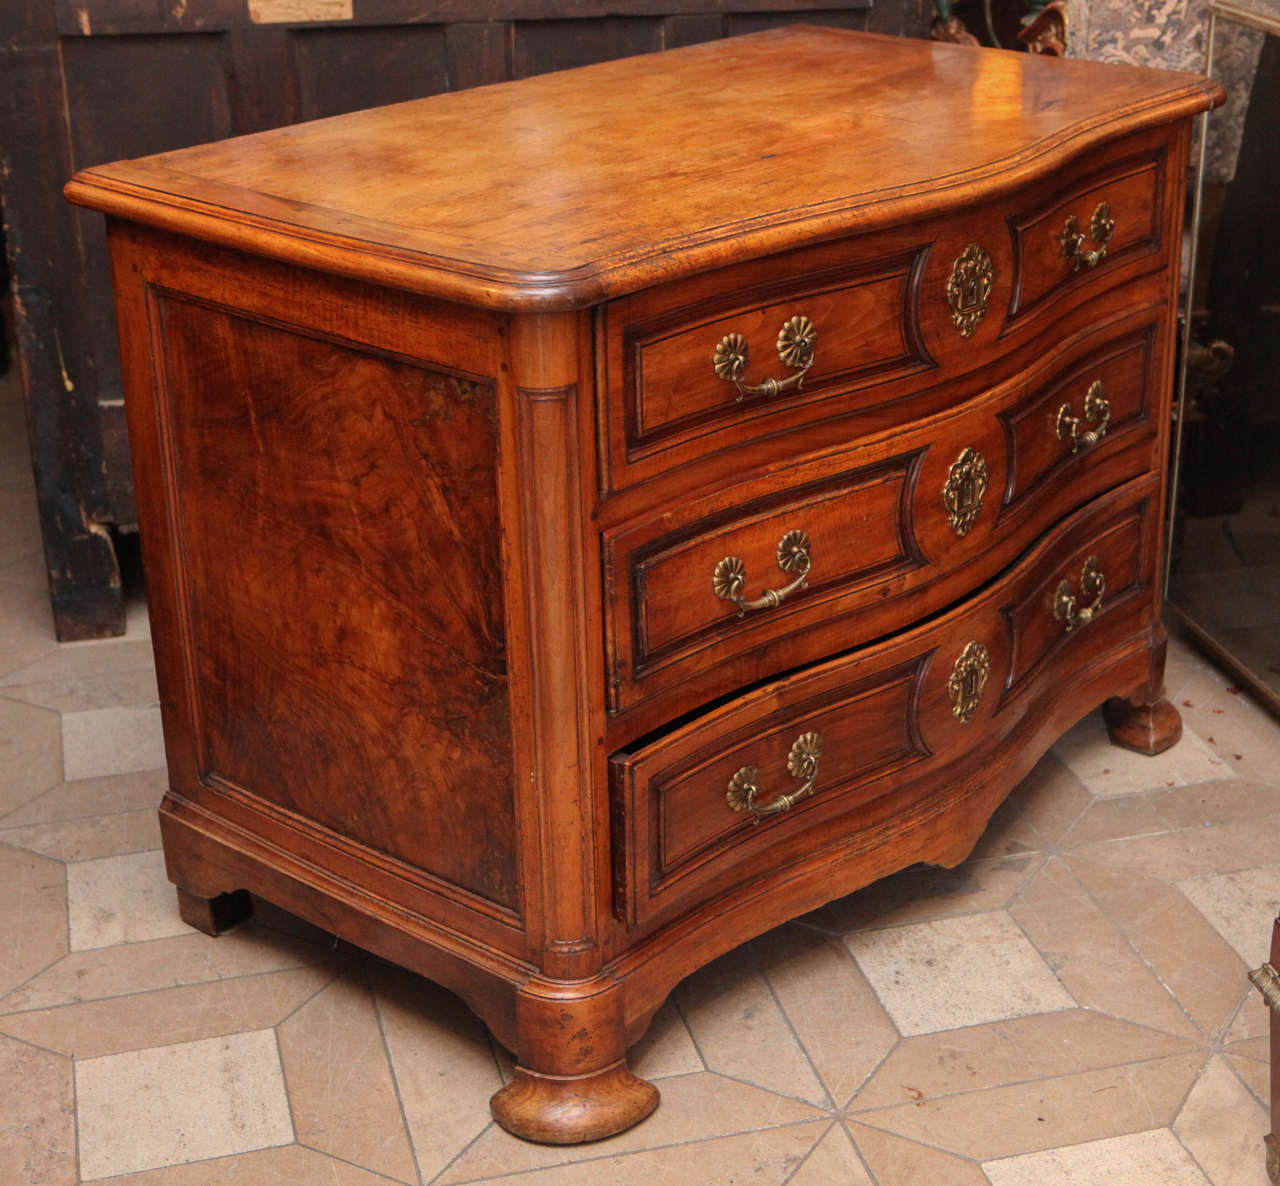 18th c. French Walnut 3 drawer Serpentine Commode with brass hardware.